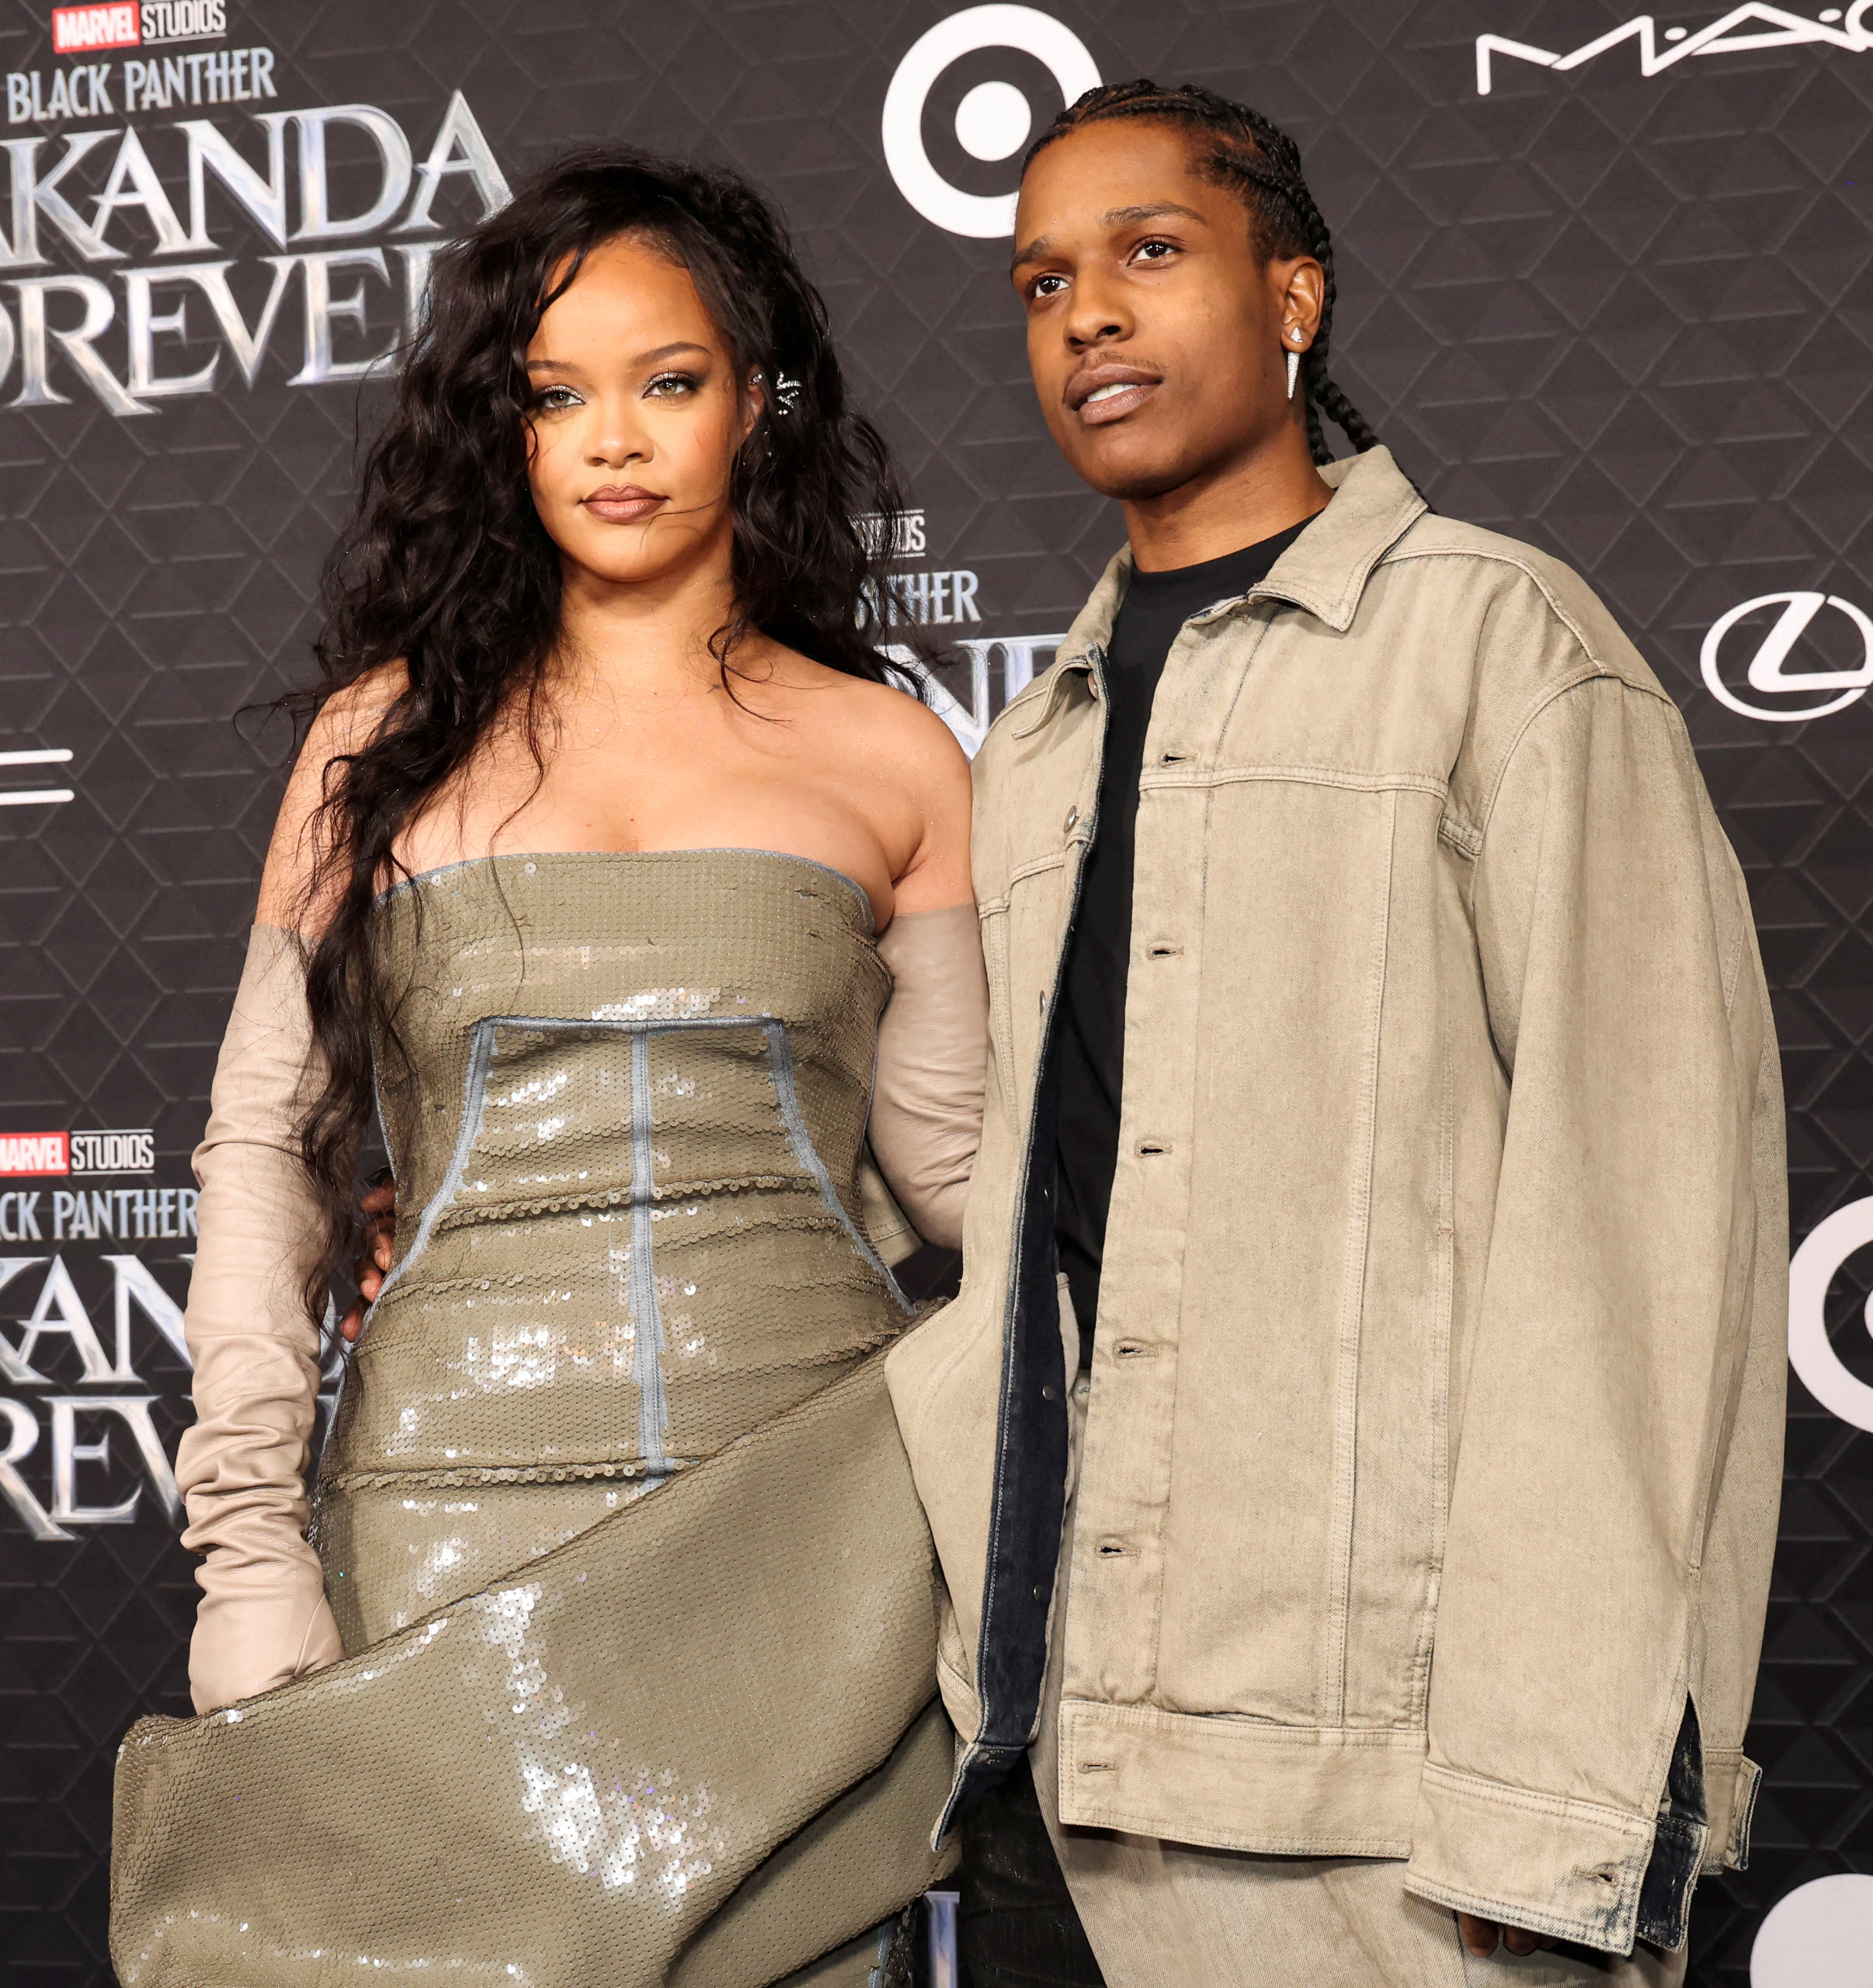 Singer Rihanna and rapper A$AP Rocky attend a premiere for the film Black Panther: Wakanda Forever in Los Angeles, California, U.S., October 26, 2022. REUTERS/Mario Anzuoni